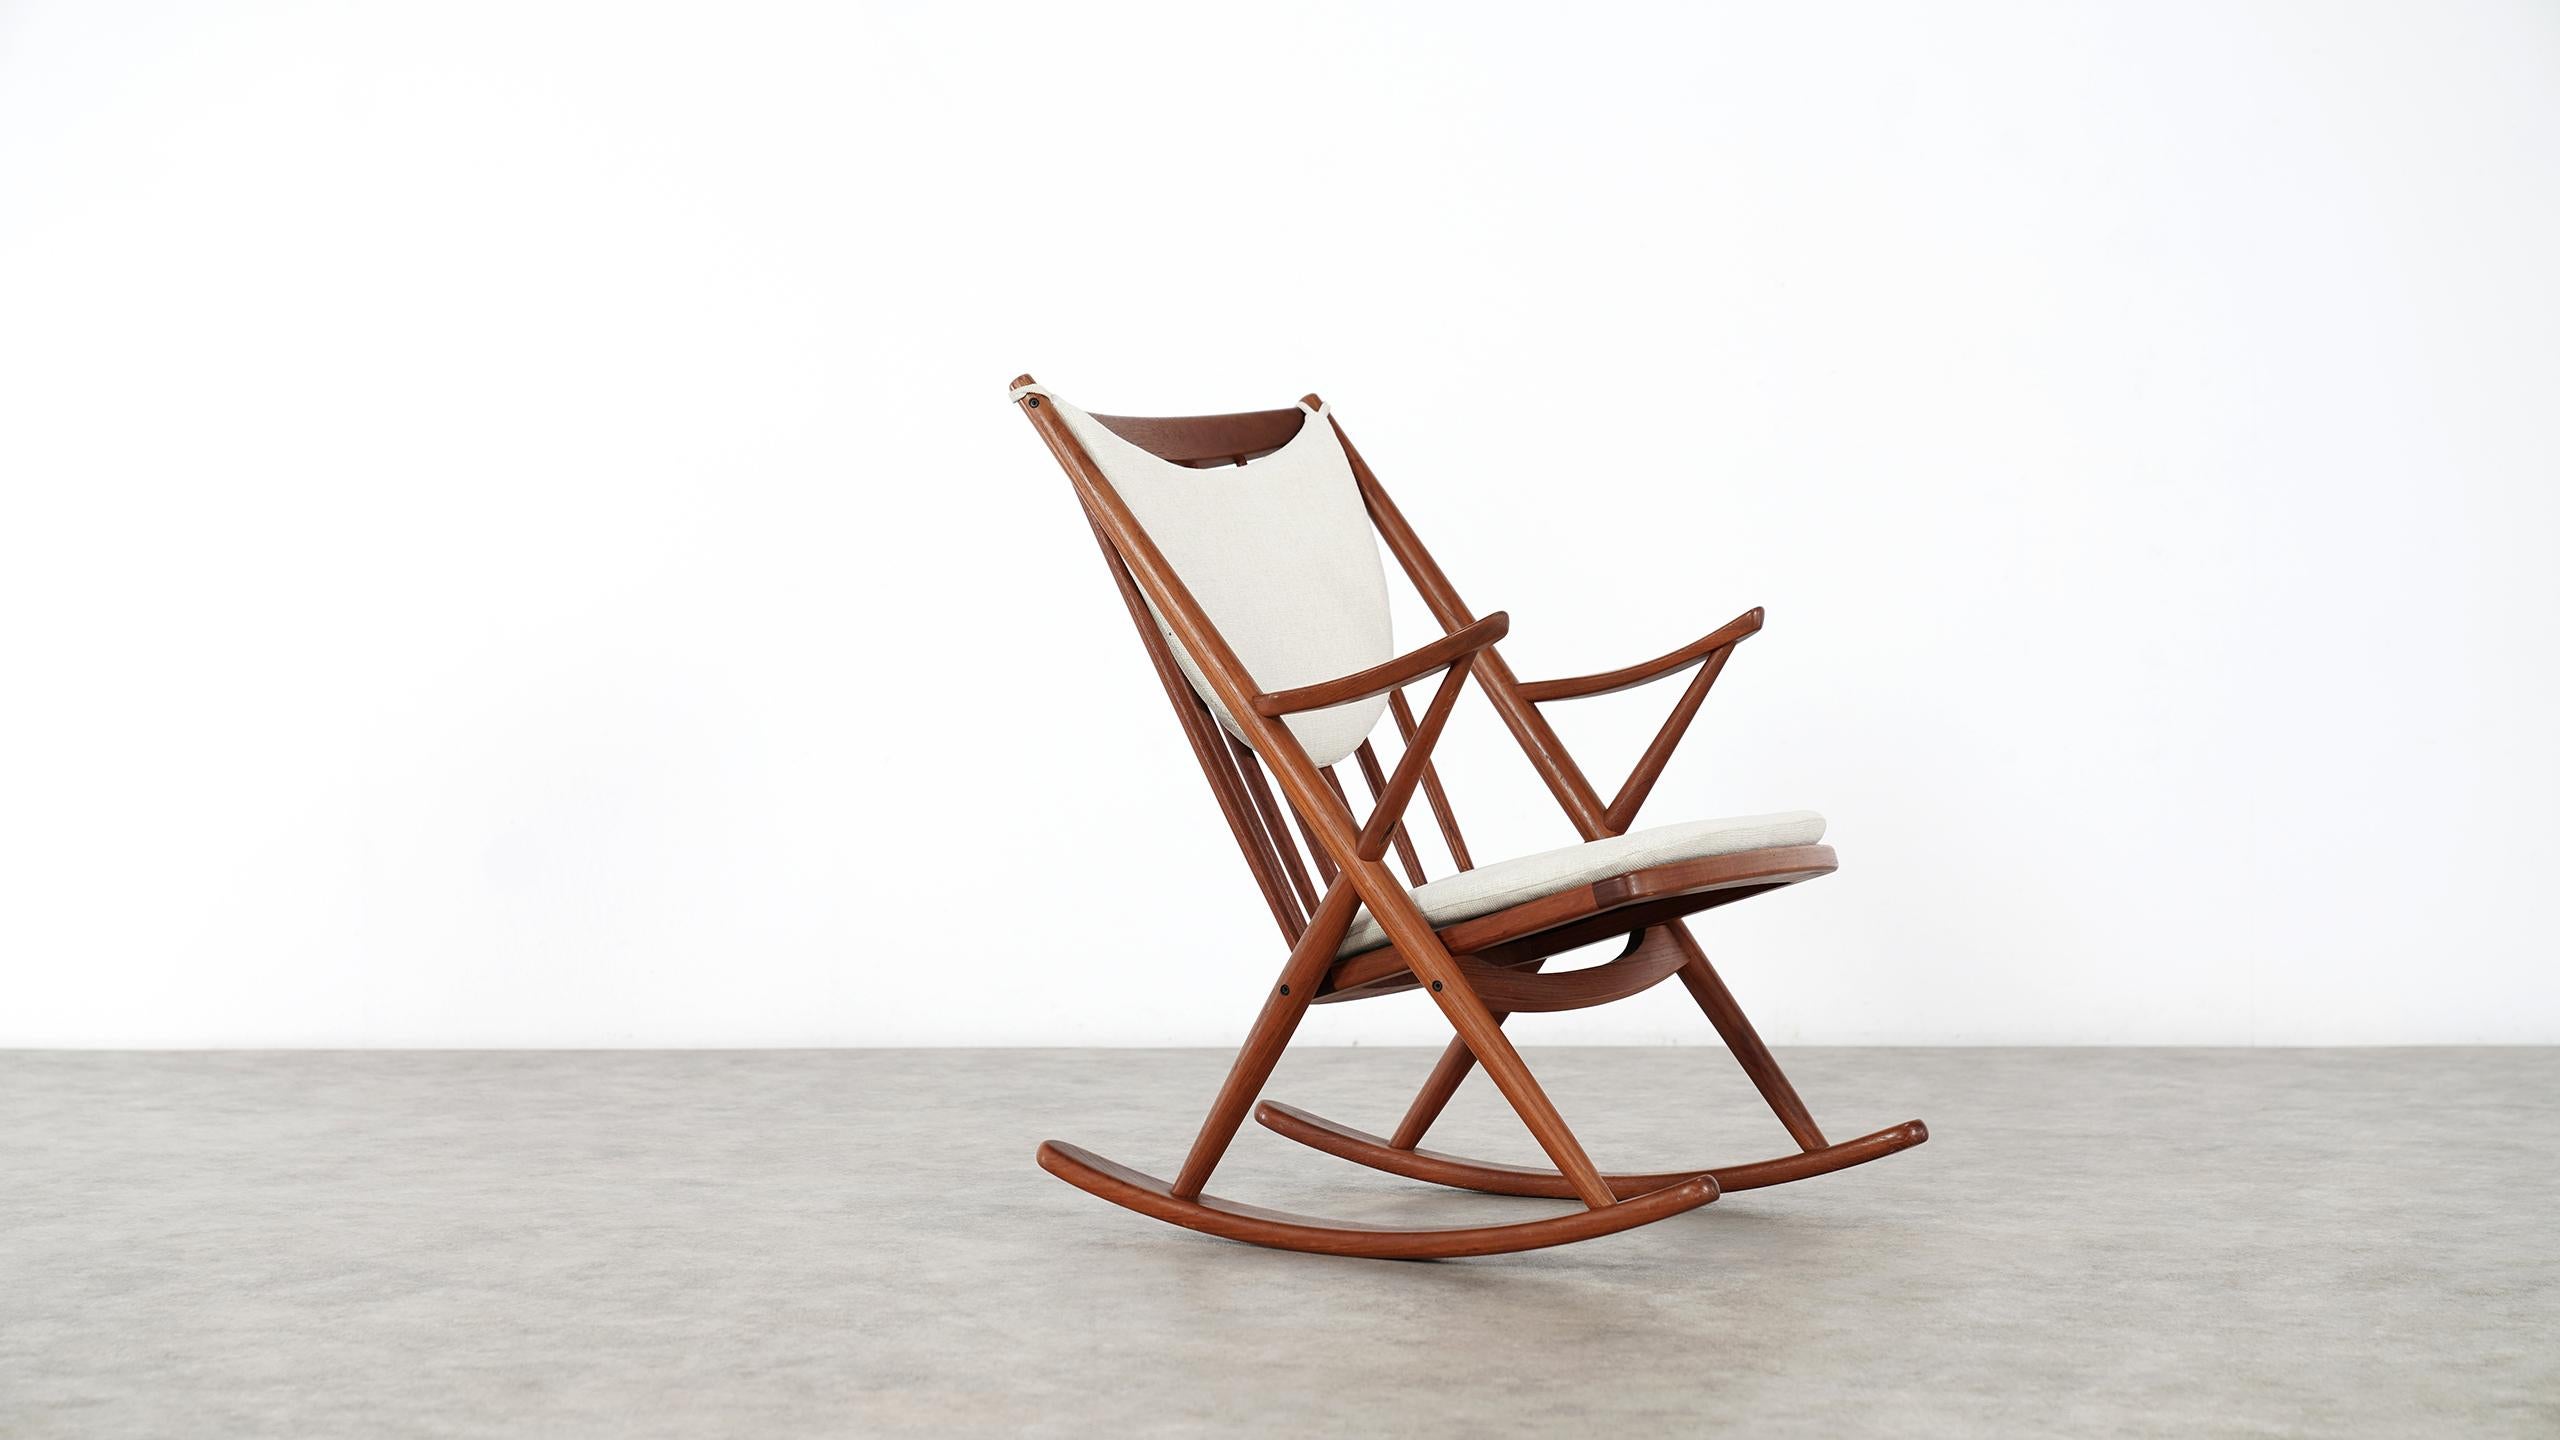 Danish modern teak rocking chair by Frank Reenskaug for Bramin Møbler

Comfortable rocking chair designed by Frank Reenskaug for Bramin Møbler in Denmark, circa 1960s.
Features a teak wood frame with six vertical spindles on the open back for